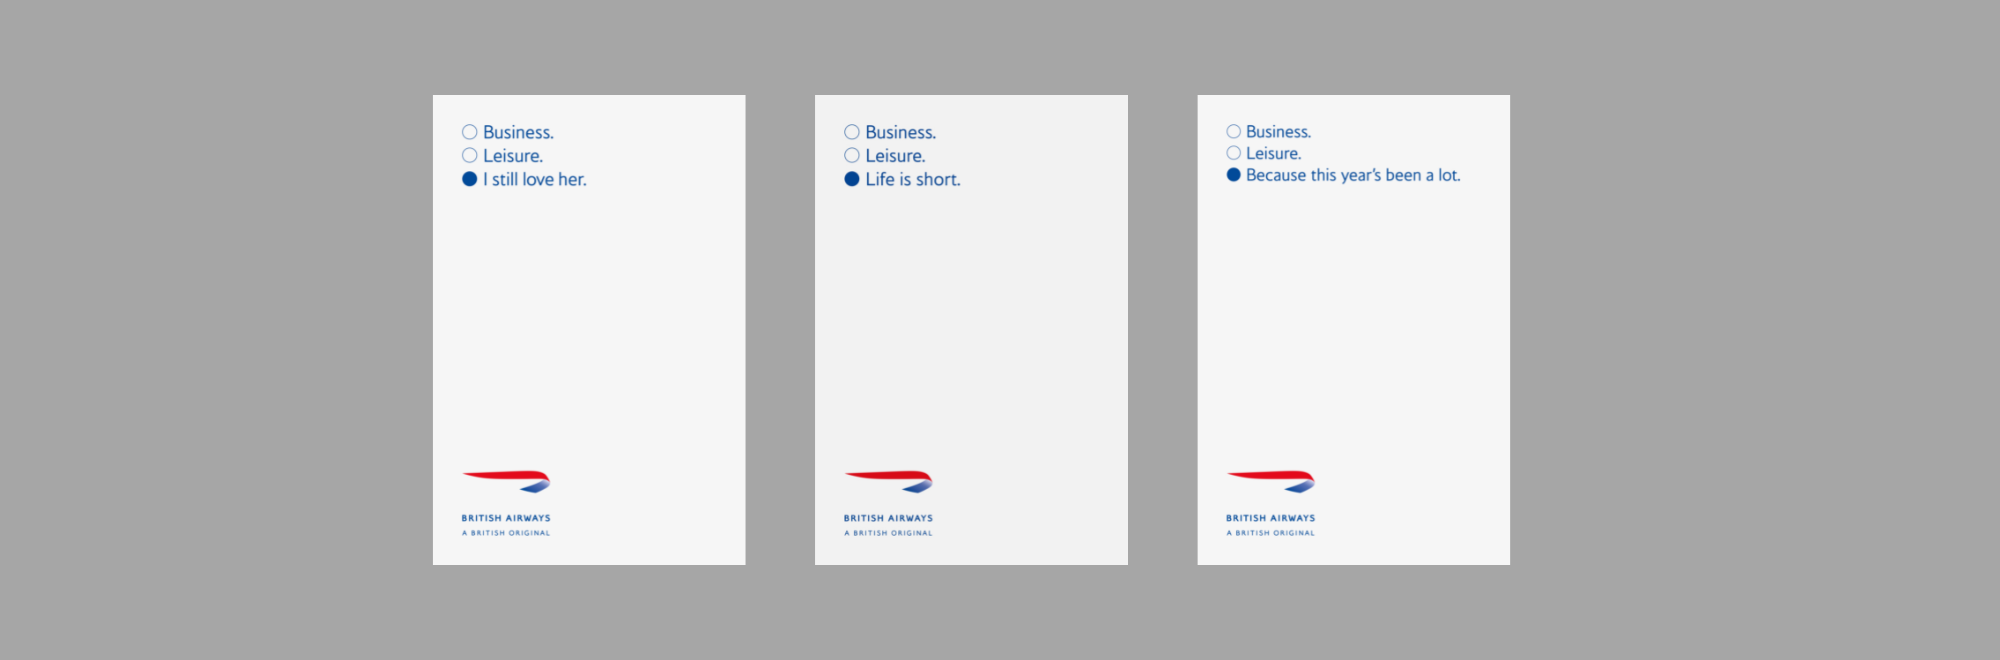 A British Original: British Airways launches a campaign where no two ads are the same